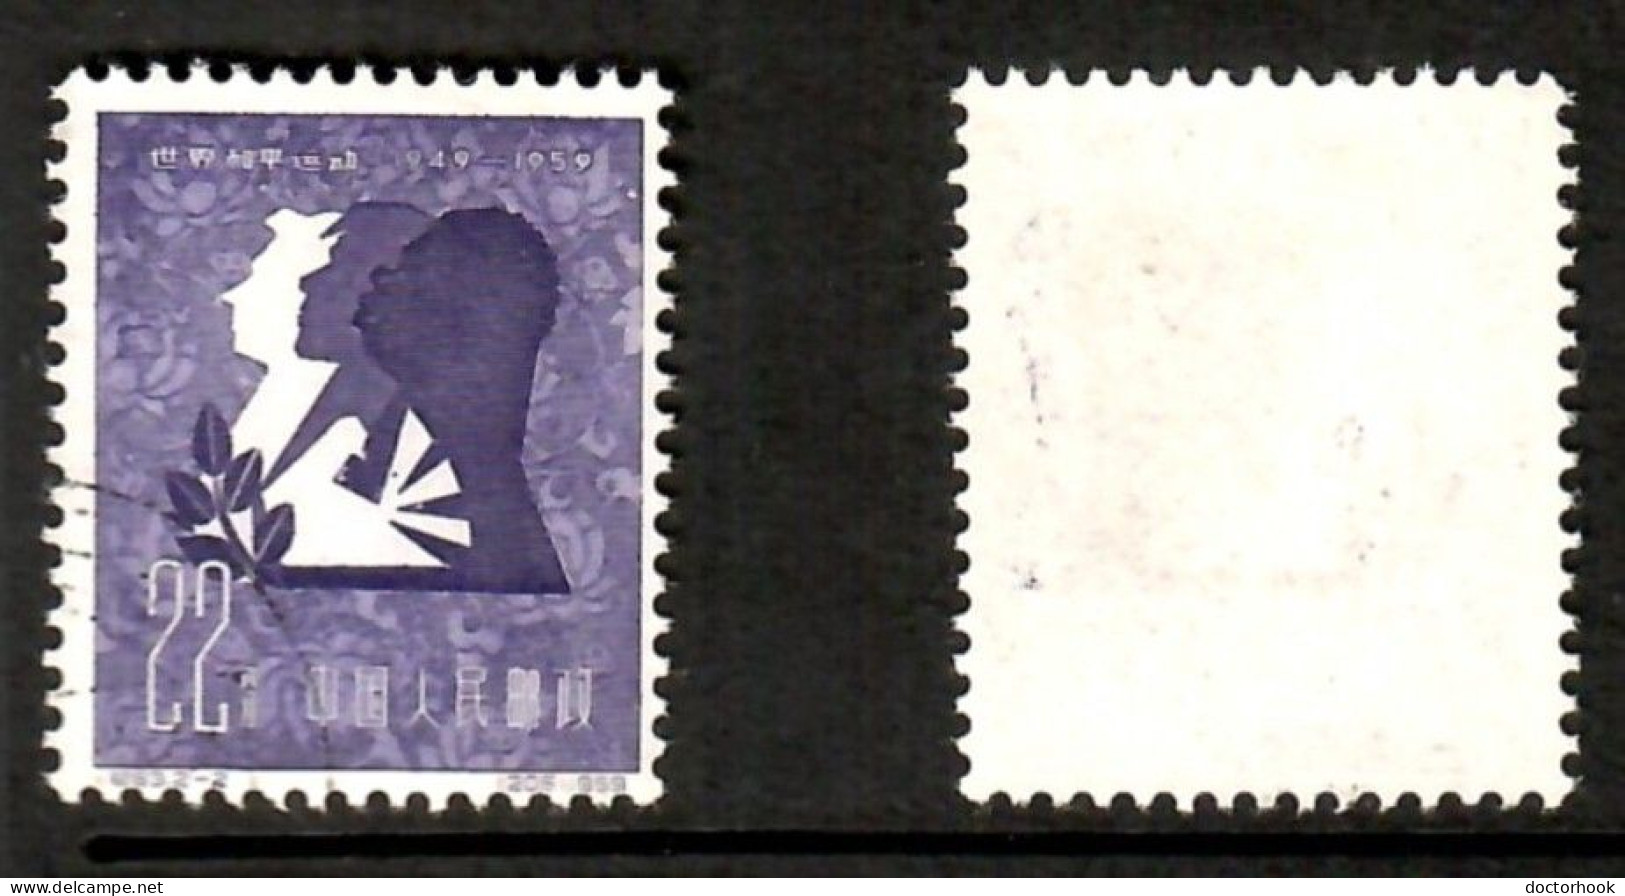 PEOPLES REPUBLIC Of CHINA   Scott # 421 USED (CONDITION AS PER SCAN) (Stamp Scan # 1007-3) - Used Stamps